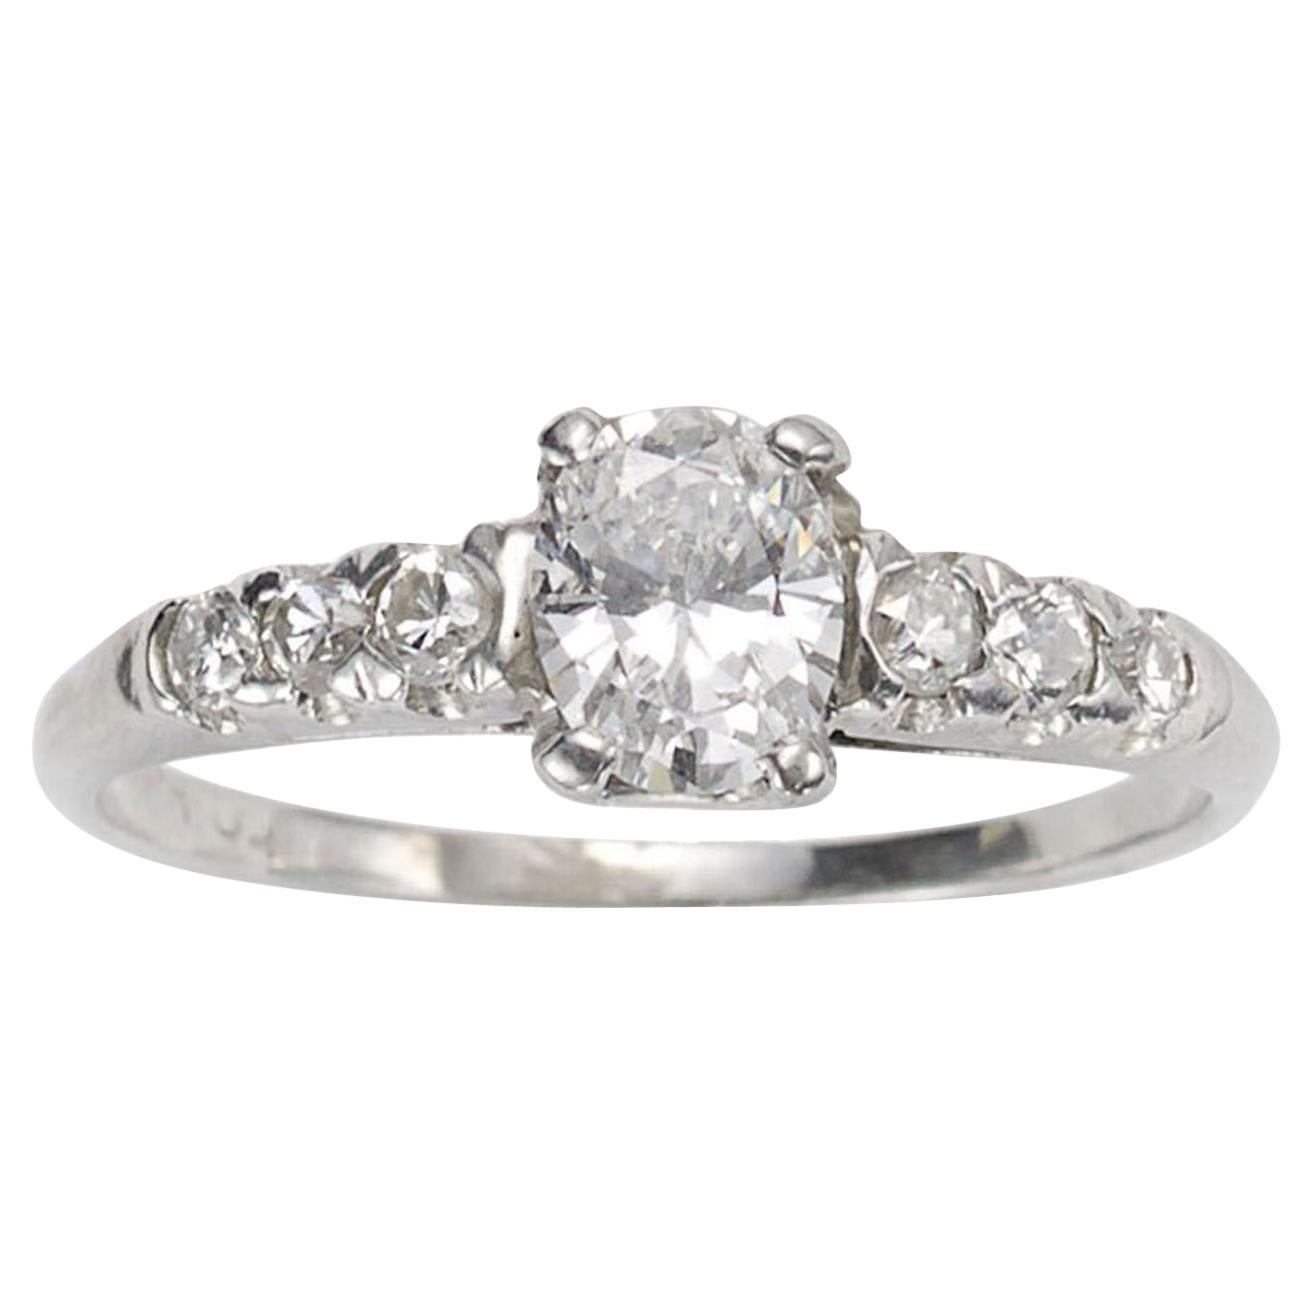 Oval Diamond and Platinum Ring, 0.51 Carat For Sale